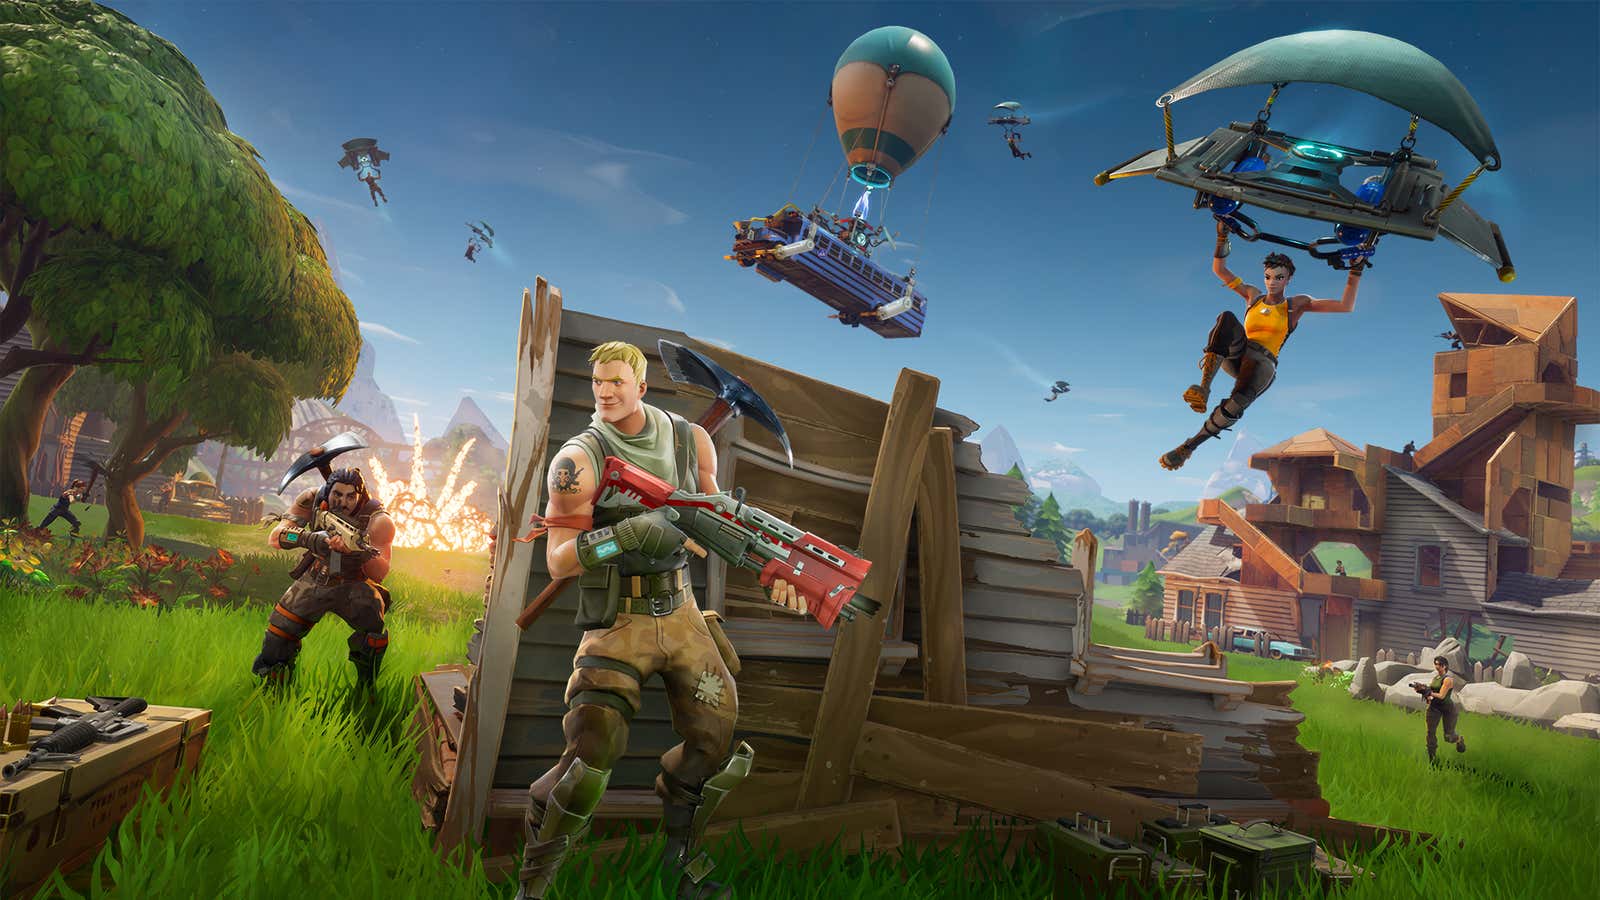 Fortnite Battle Royale is coming to Android this summer.